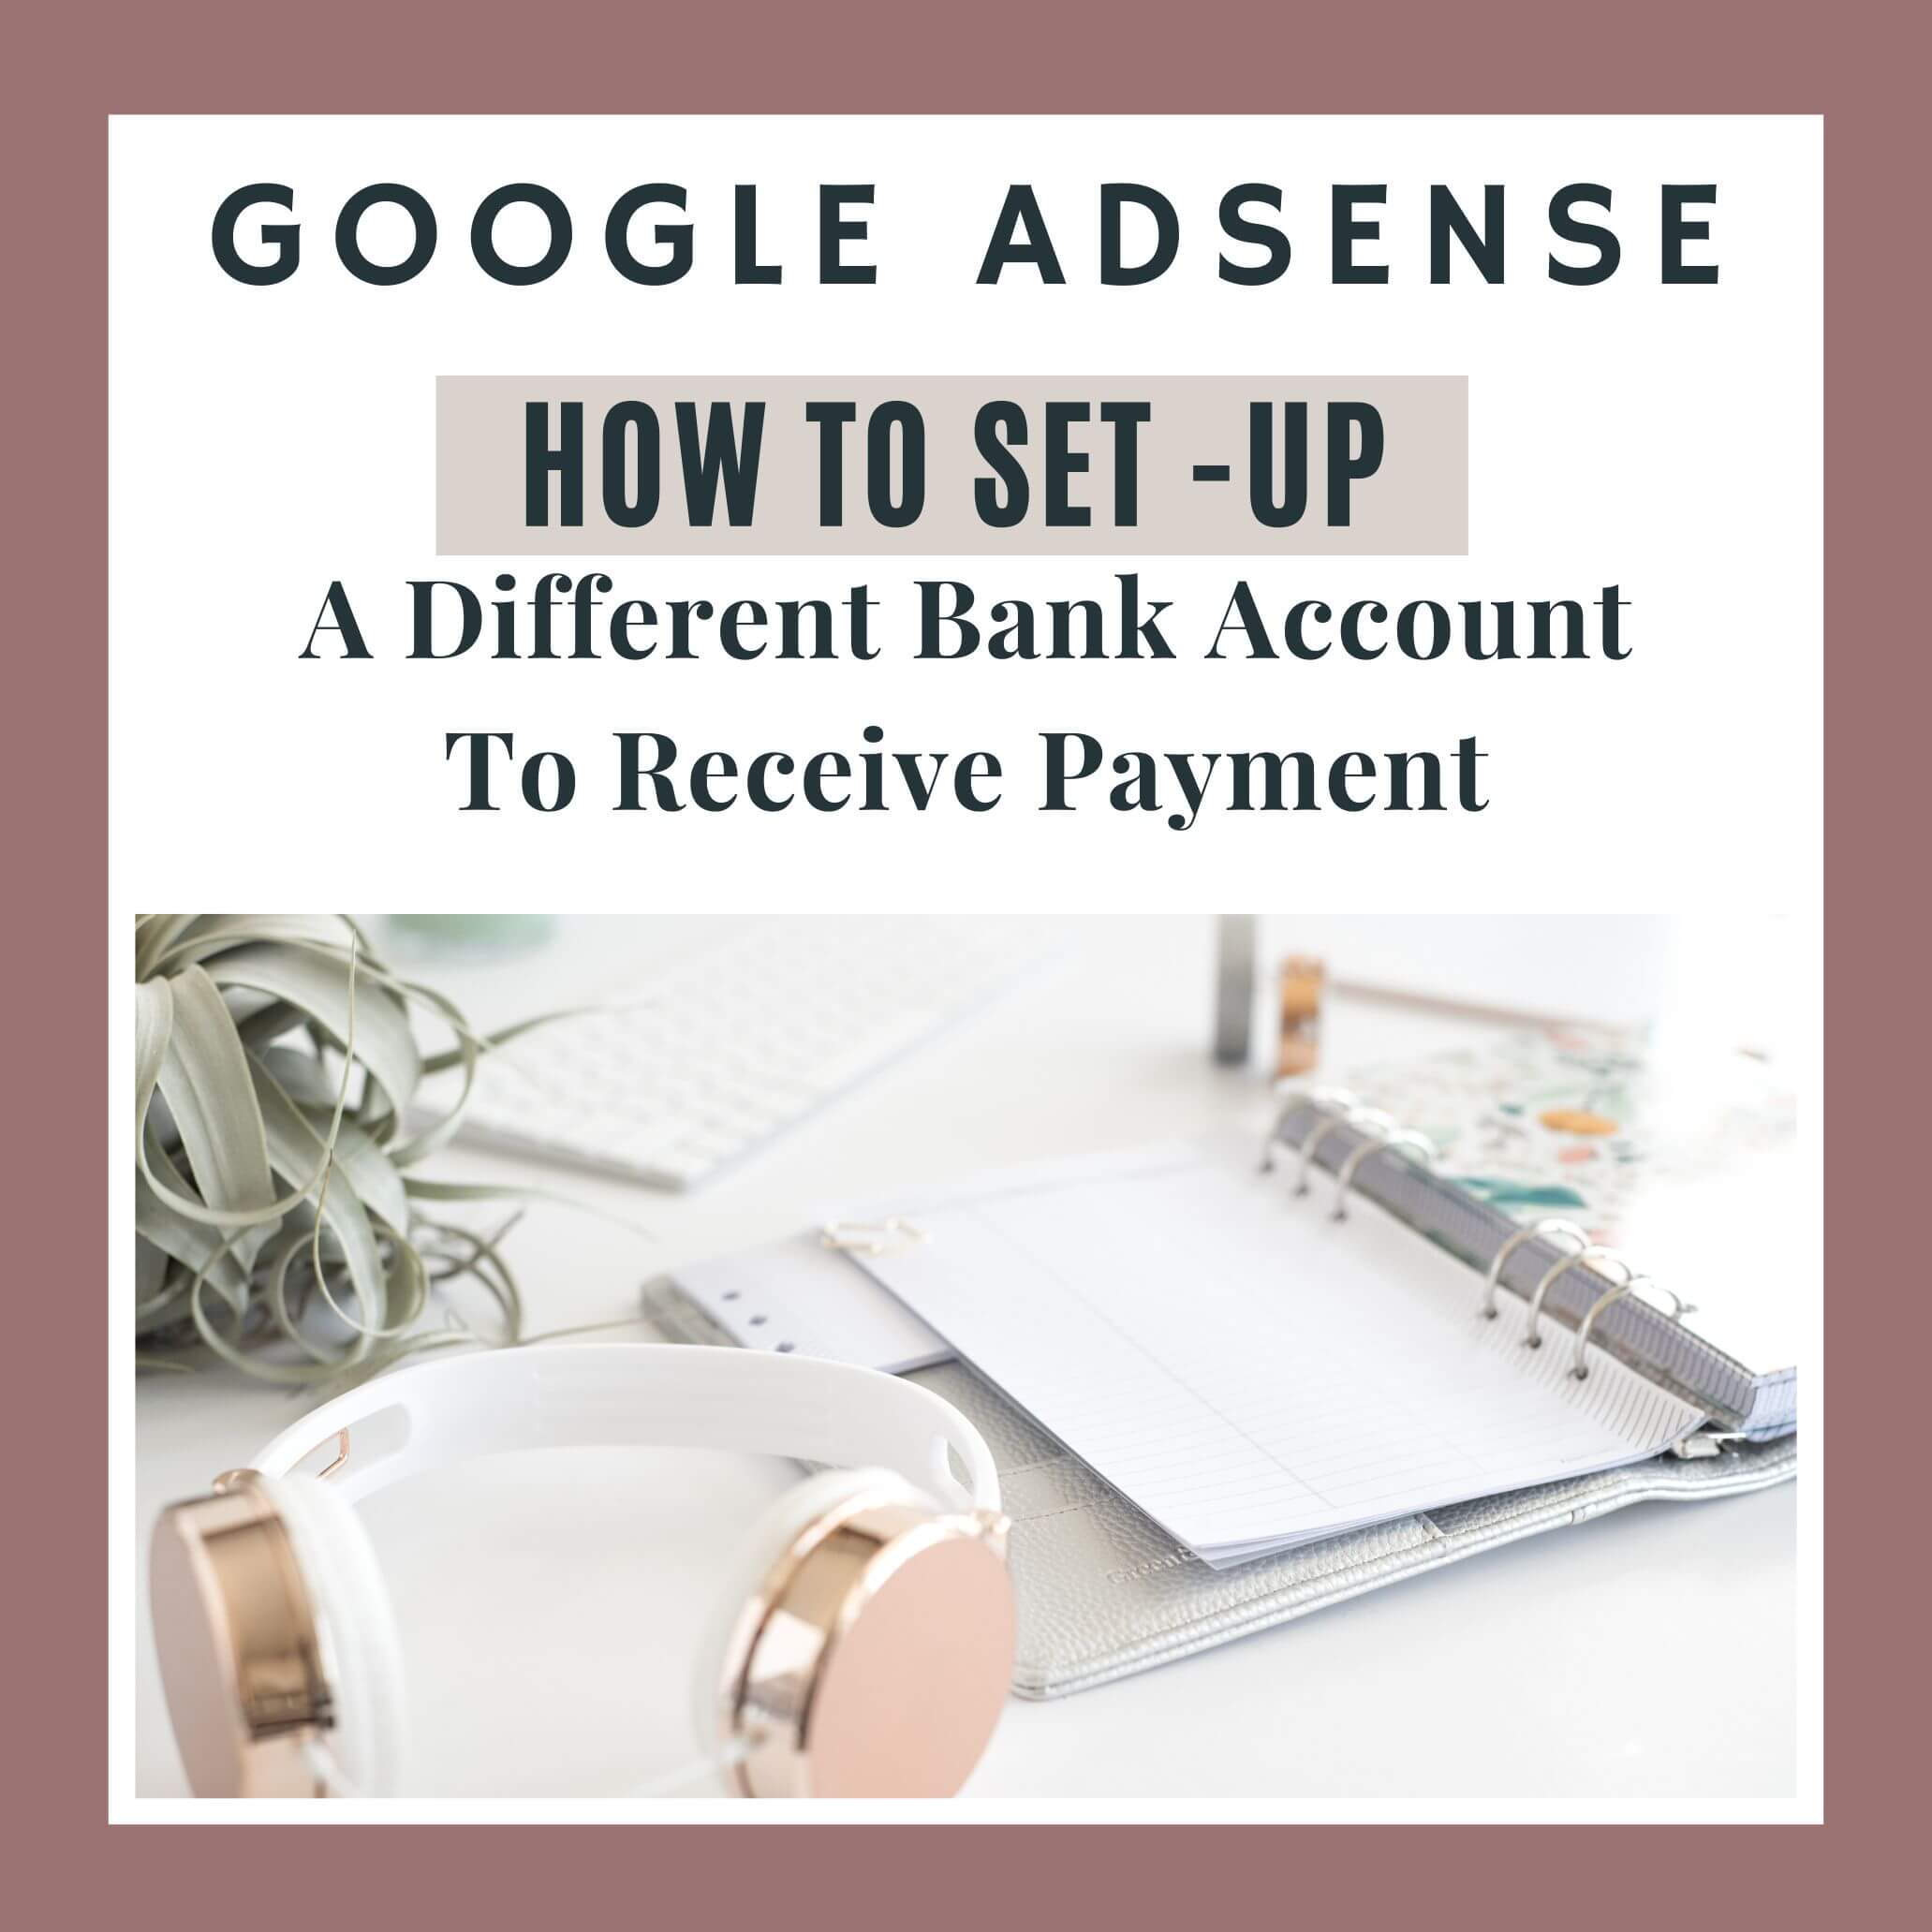 Google Adsense Can I set up somebody else’s bank account to receive my payment?